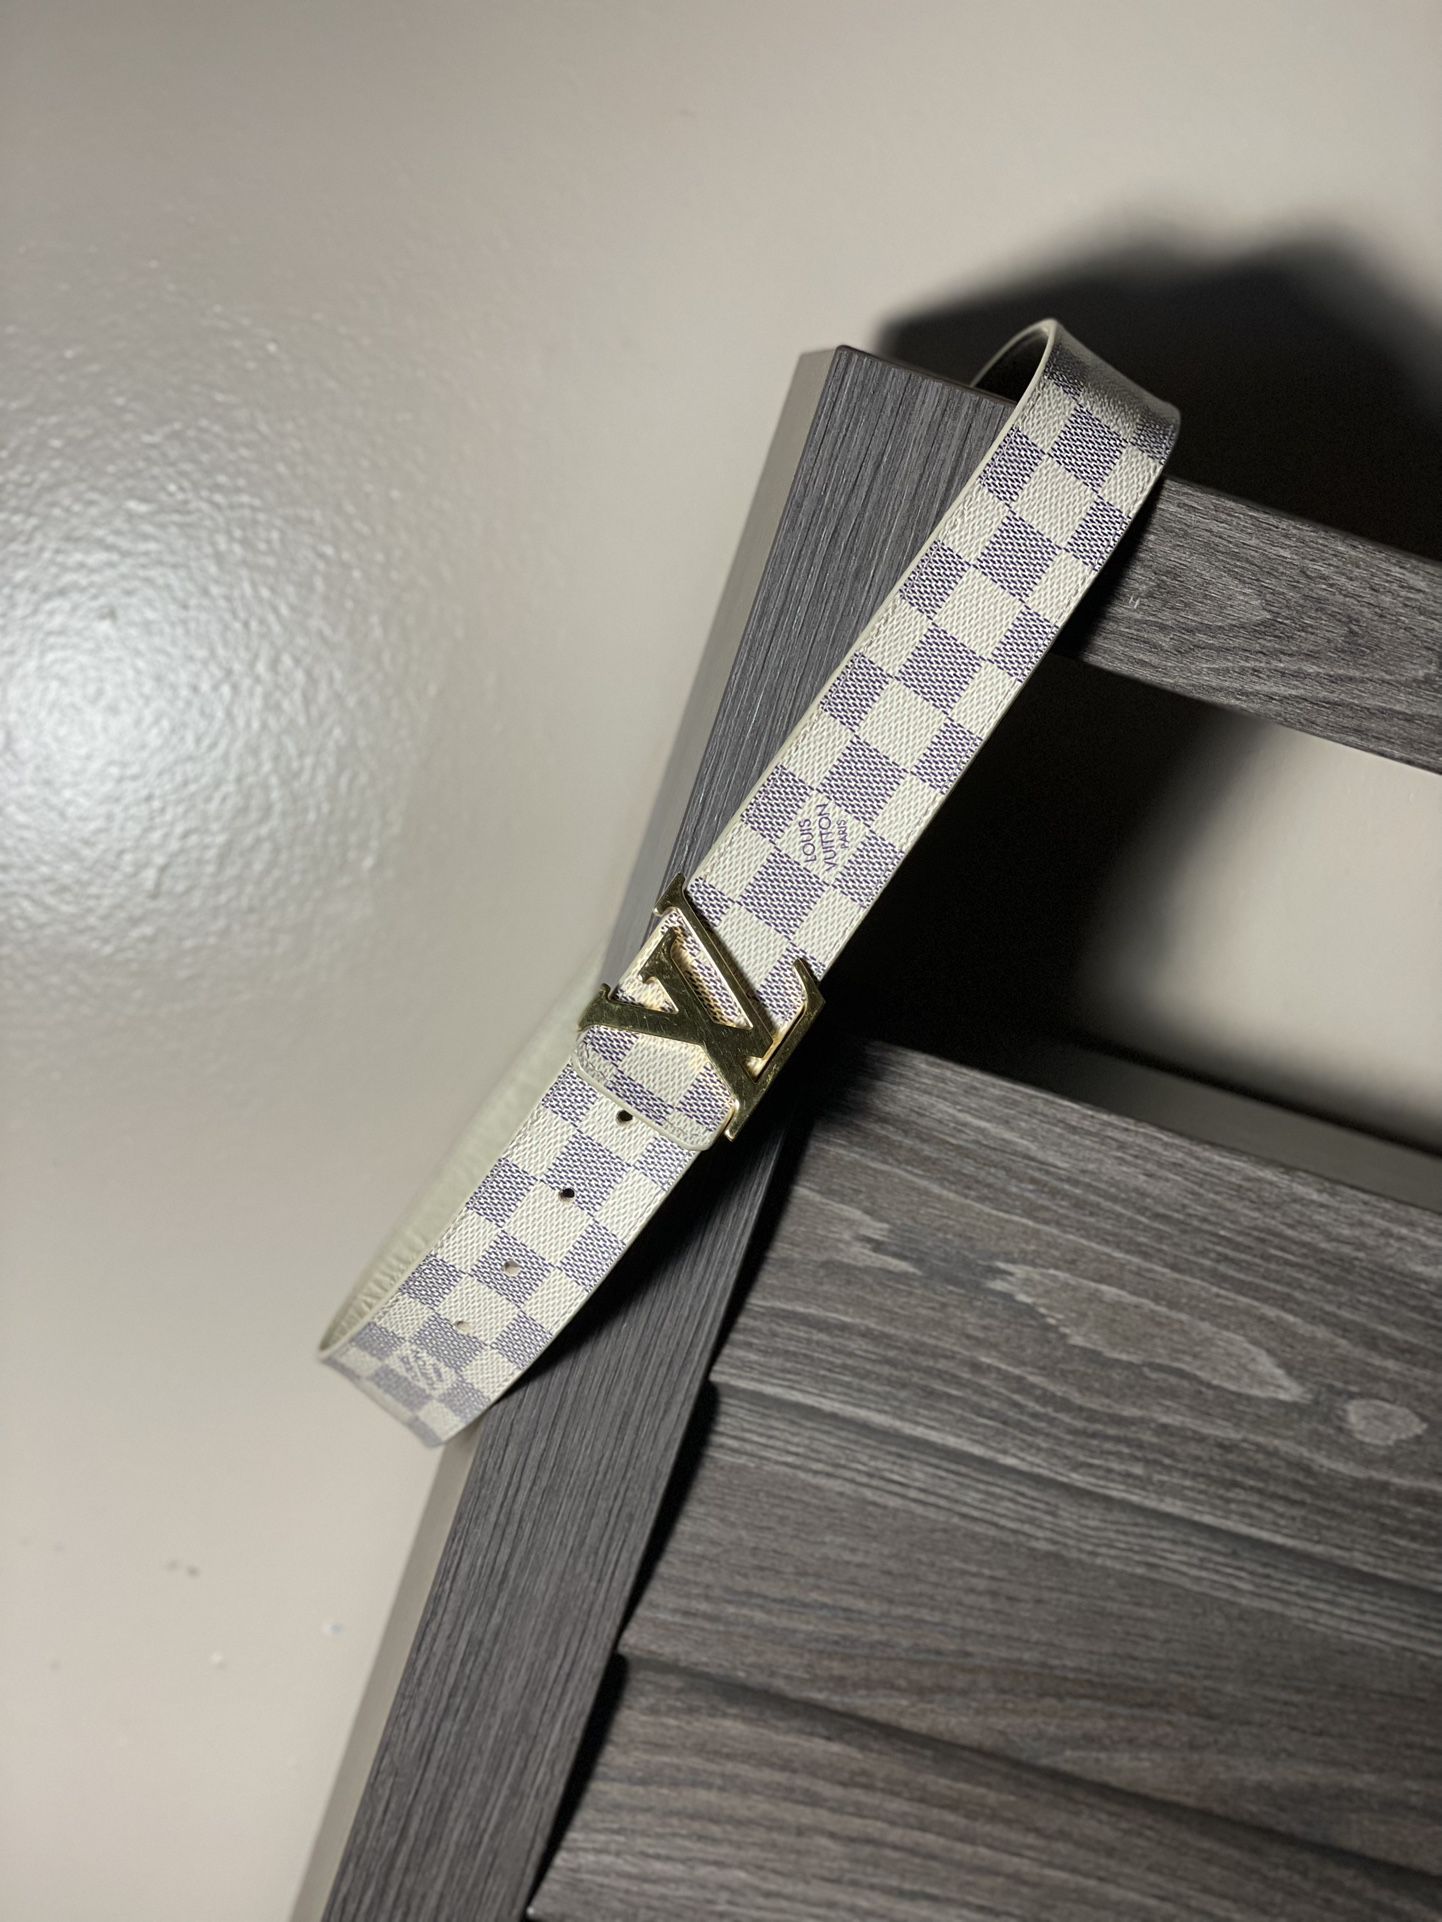 Louis Vuitton Belt for Sale in Grove City, OH - OfferUp